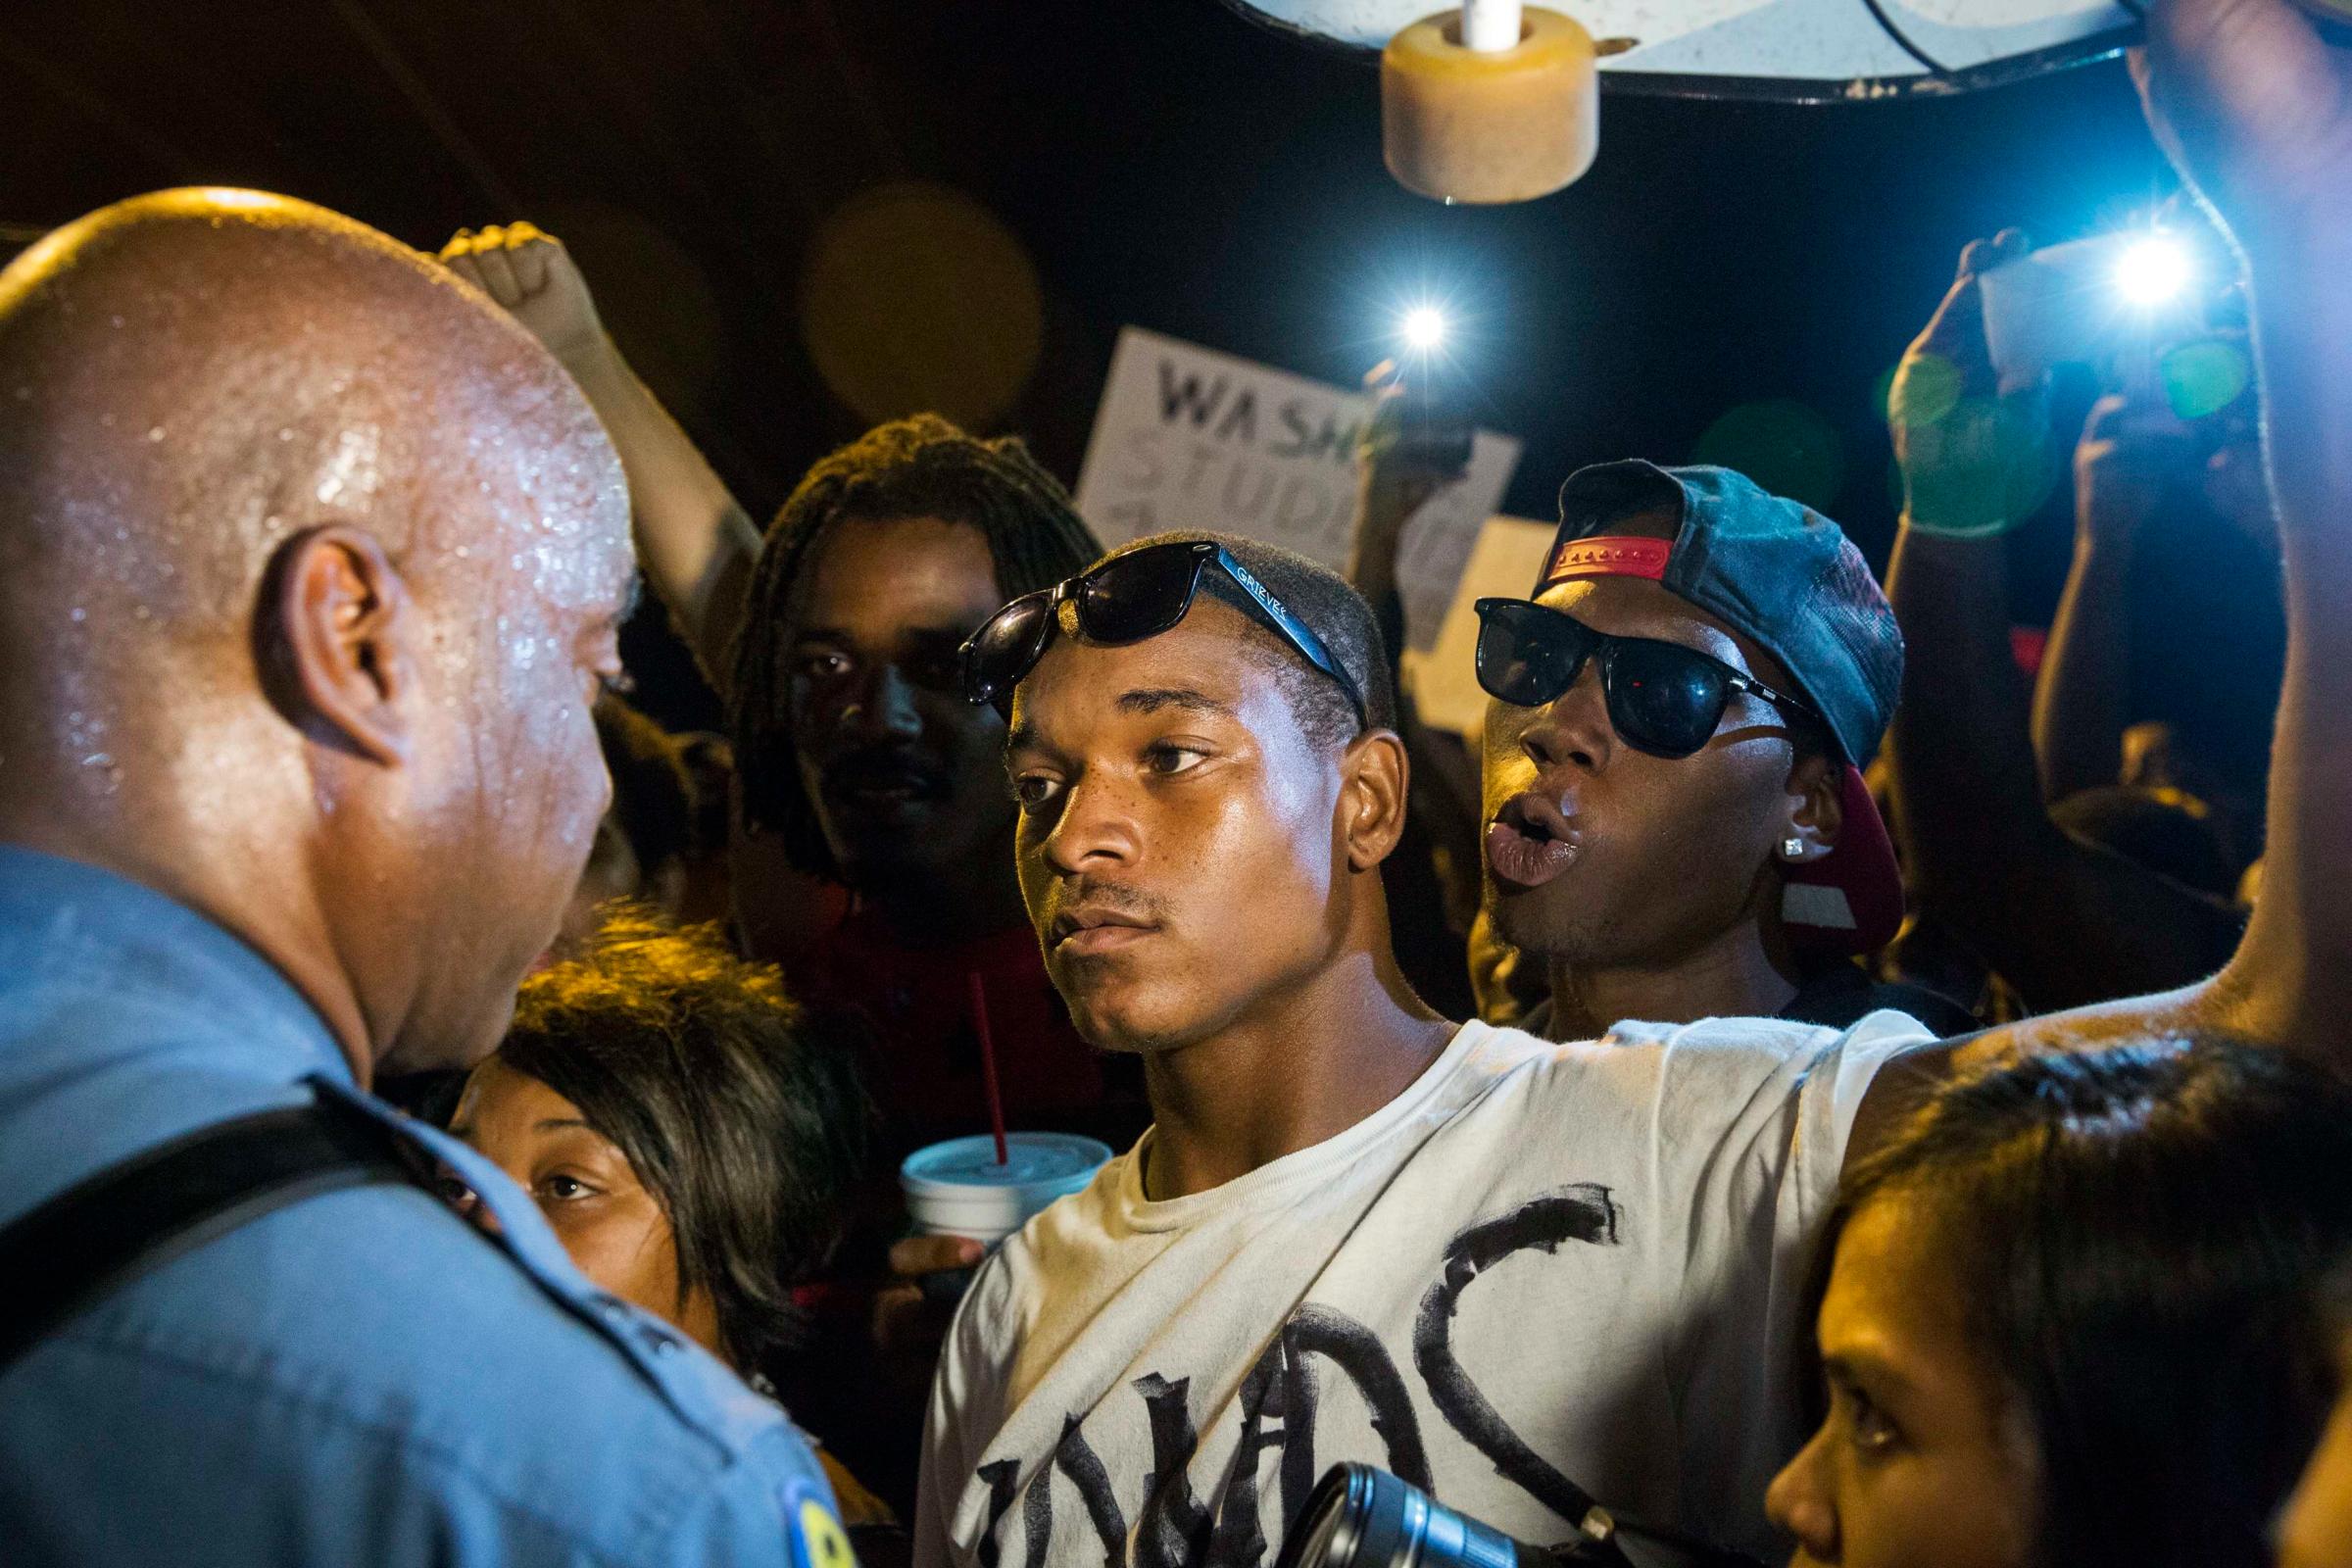 Missouri State Highway Patrol Captain Ron Johnson speaks to protesters as he walks through a peaceful demonstration as communities continue to react to the shooting of Michael Brown in Ferguson